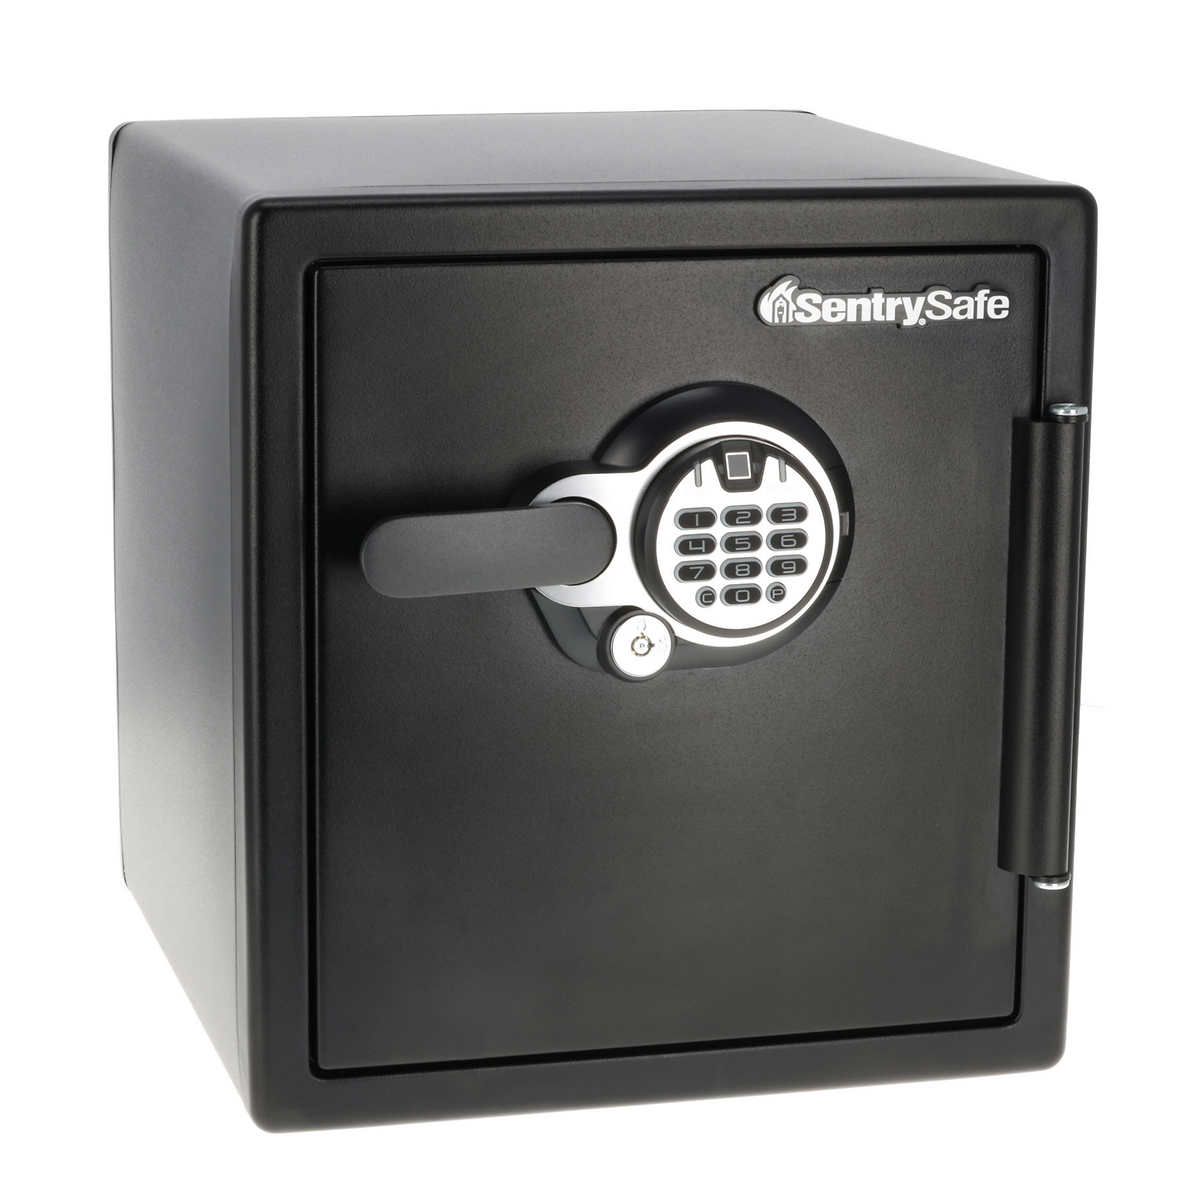 SentrySafe 1.23 cu. ft. Steel Fireproof and Waterproof Home Safe with Biometric Lock - $99